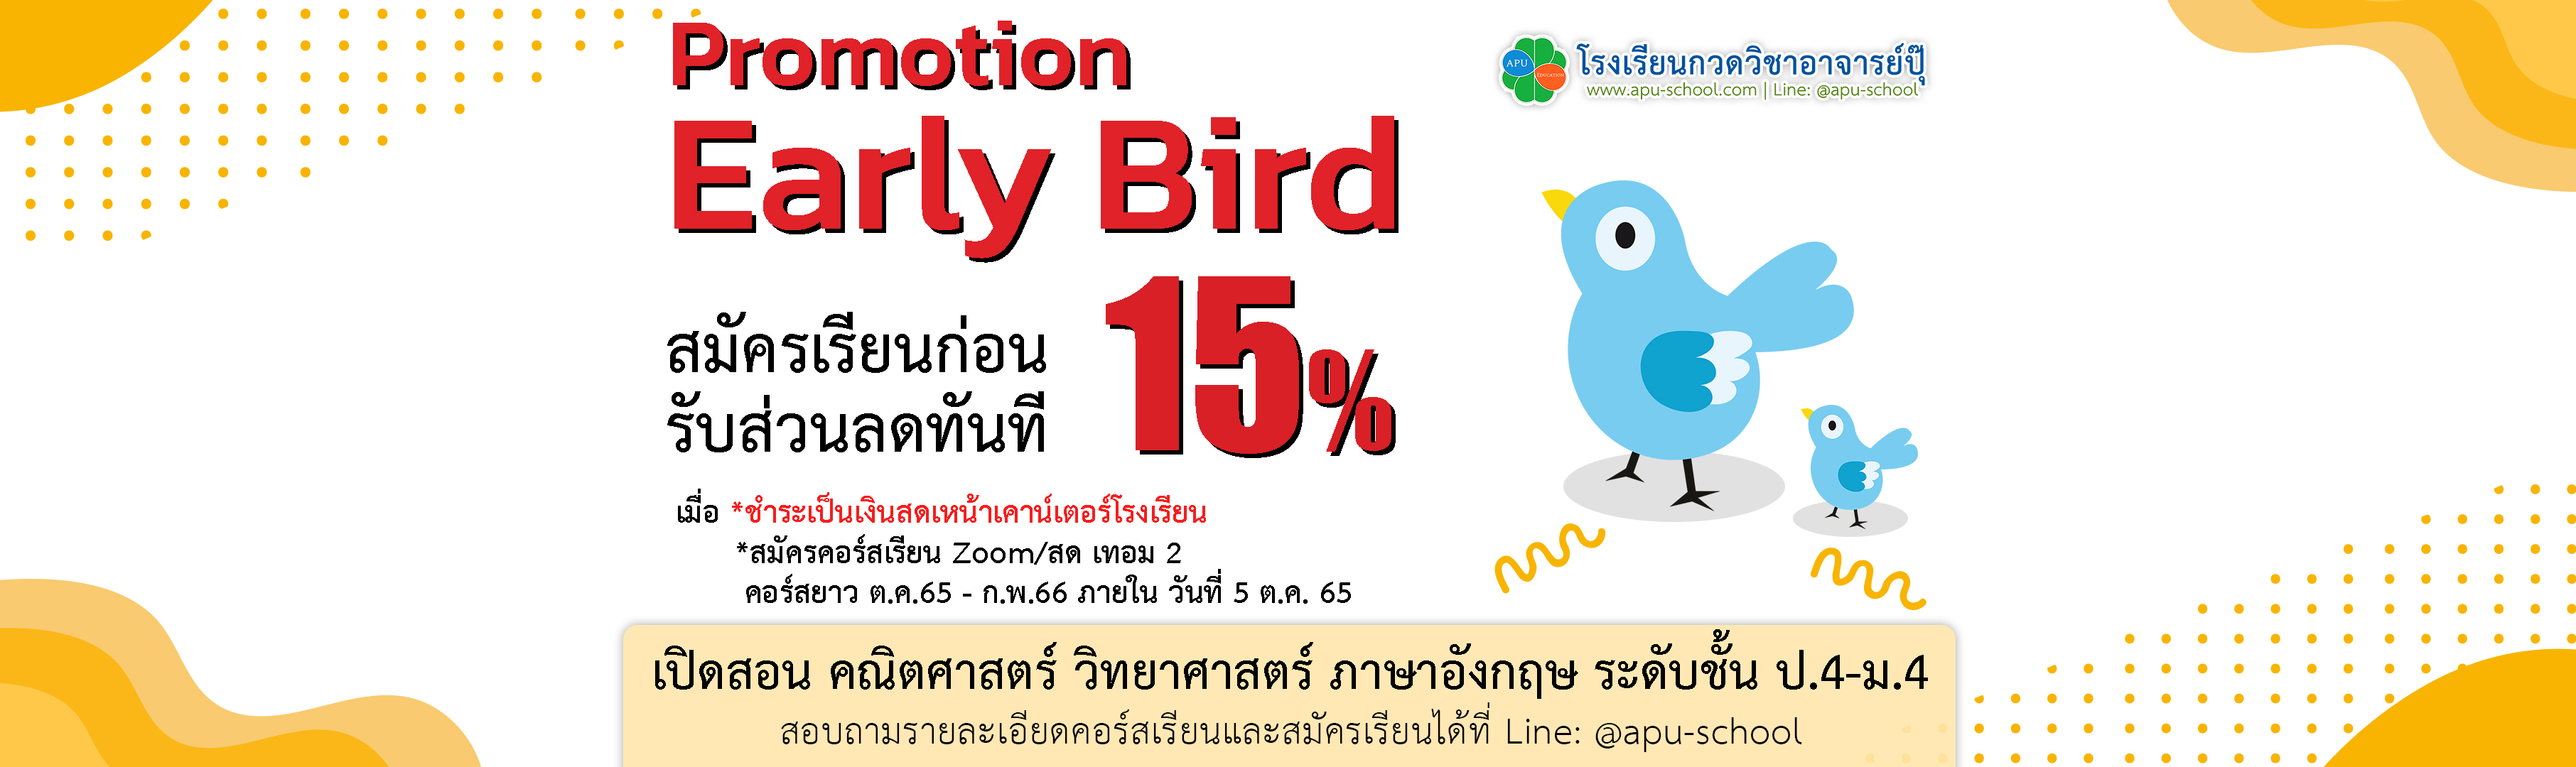 Promotion Early Bird